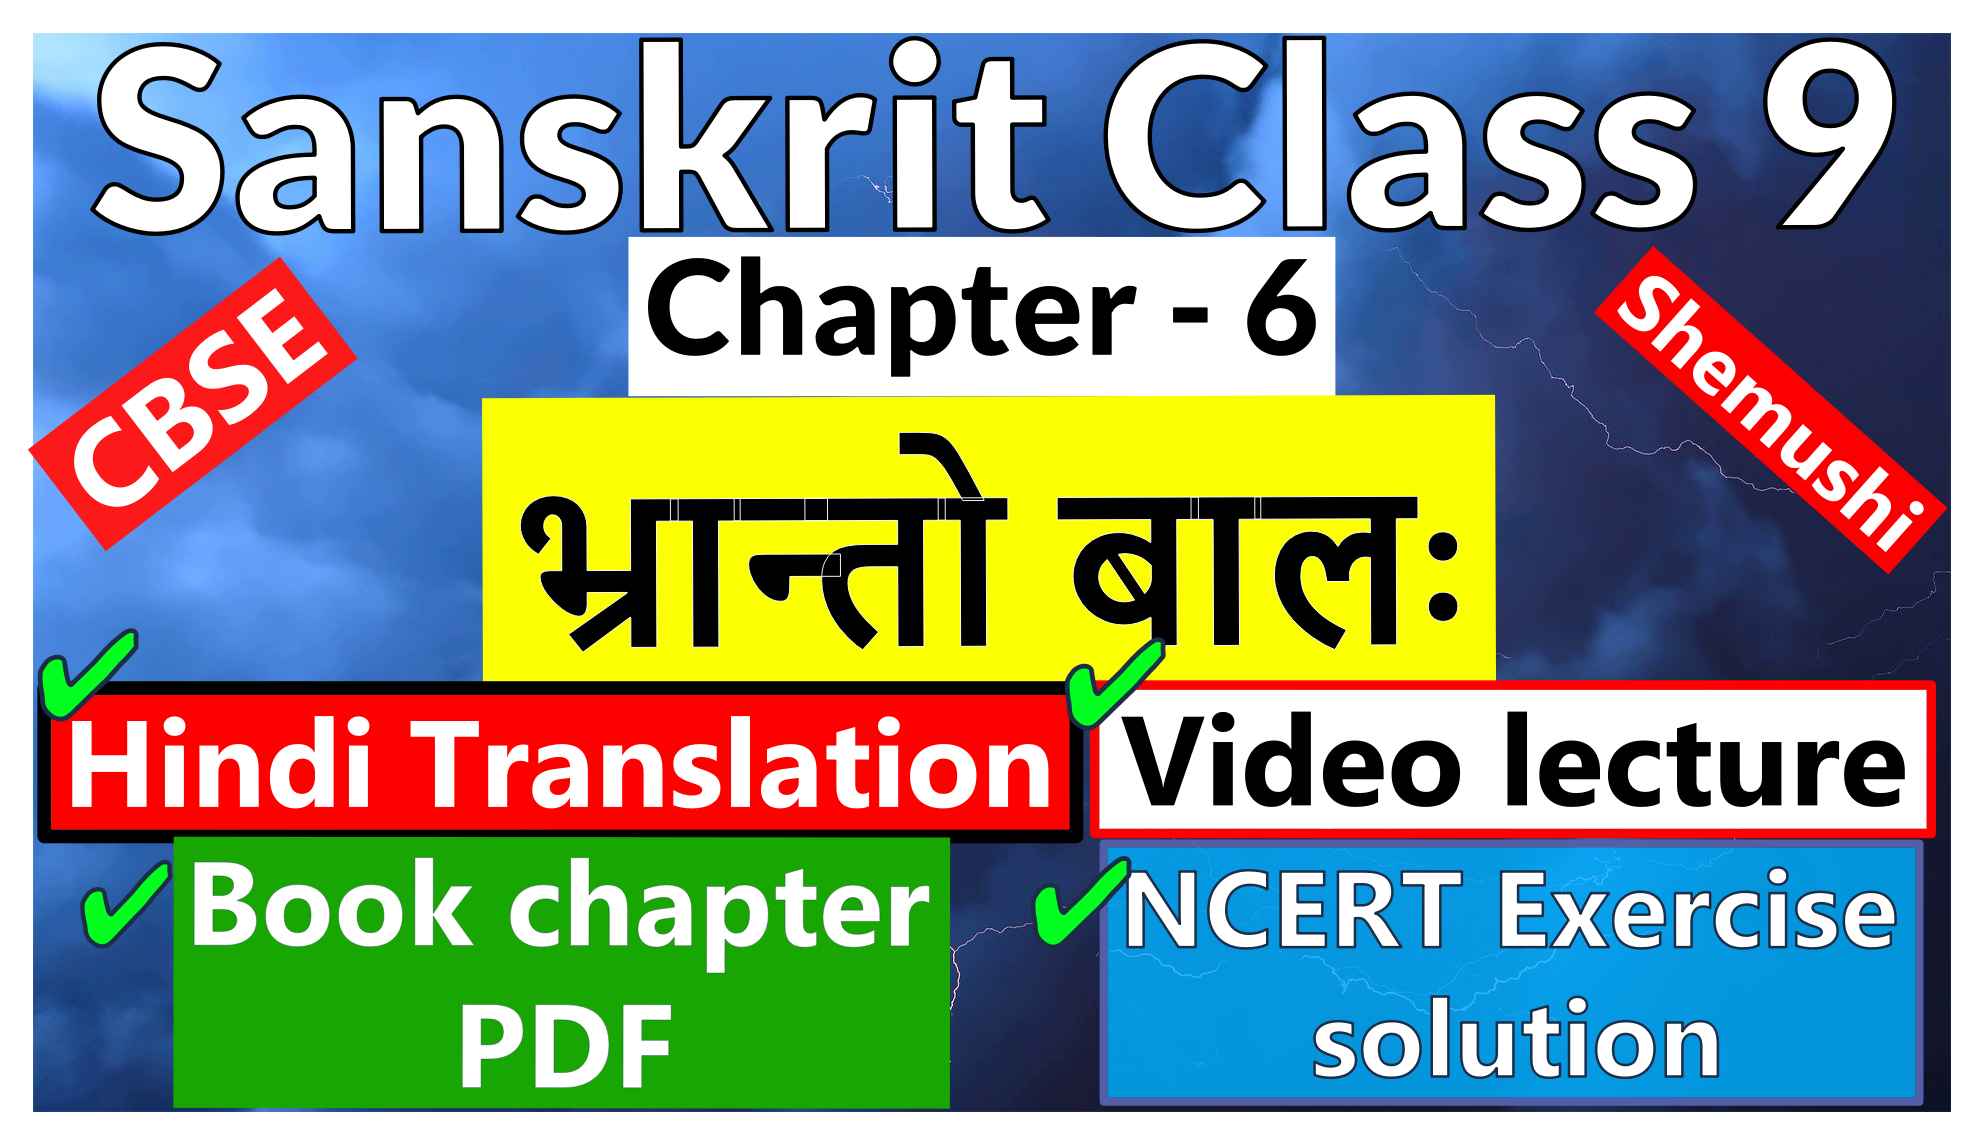 Sanskrit Class 9 Chapter 6 - भ्रान्तो बालः -Hindi Translation, Video lecture, NCERT Exercise solution (Question-Answer), Book chapter PDF